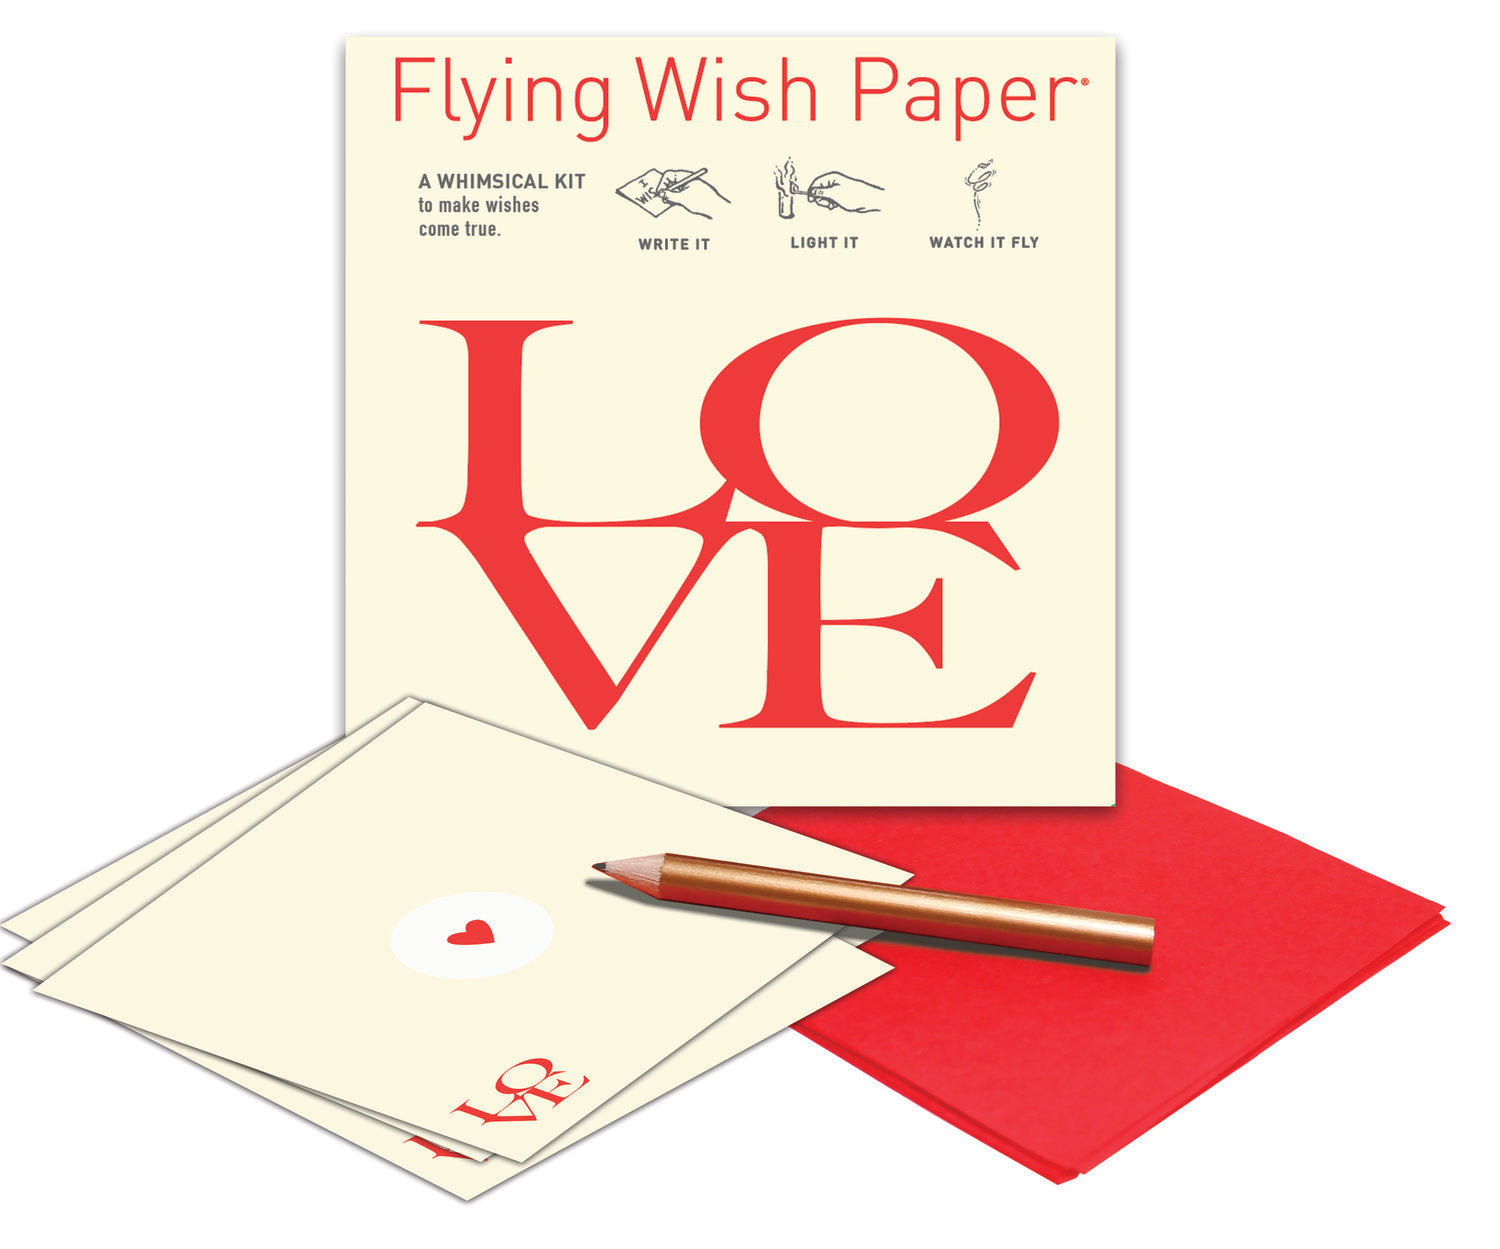  Flying Wish Paper